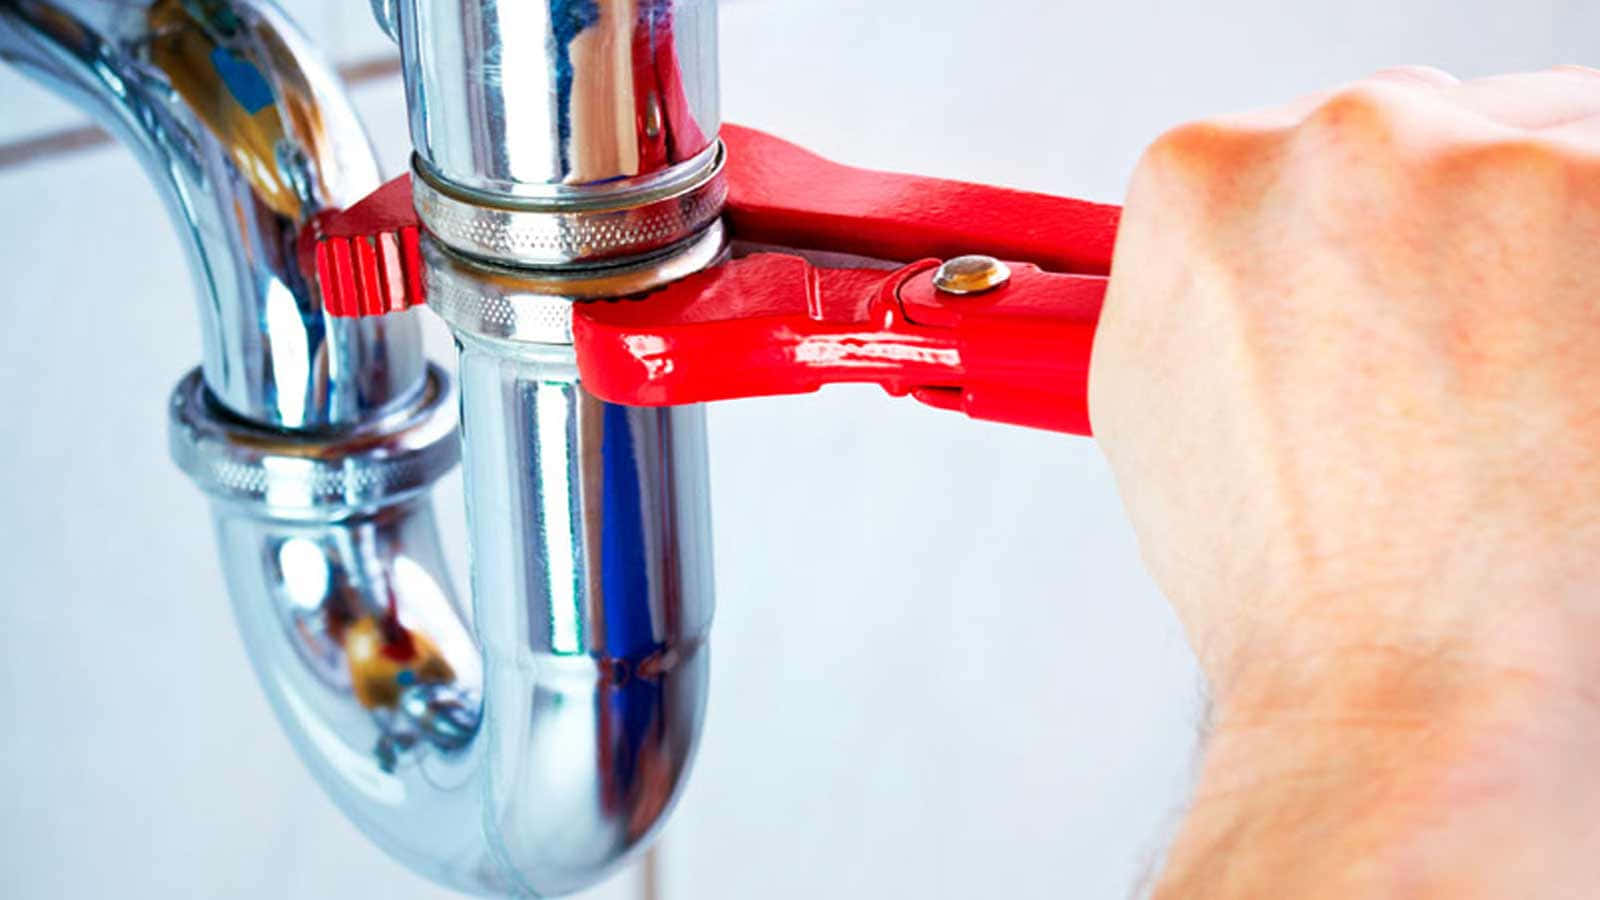 A Man Is Holding A Red Pliers To Fix A Faucet